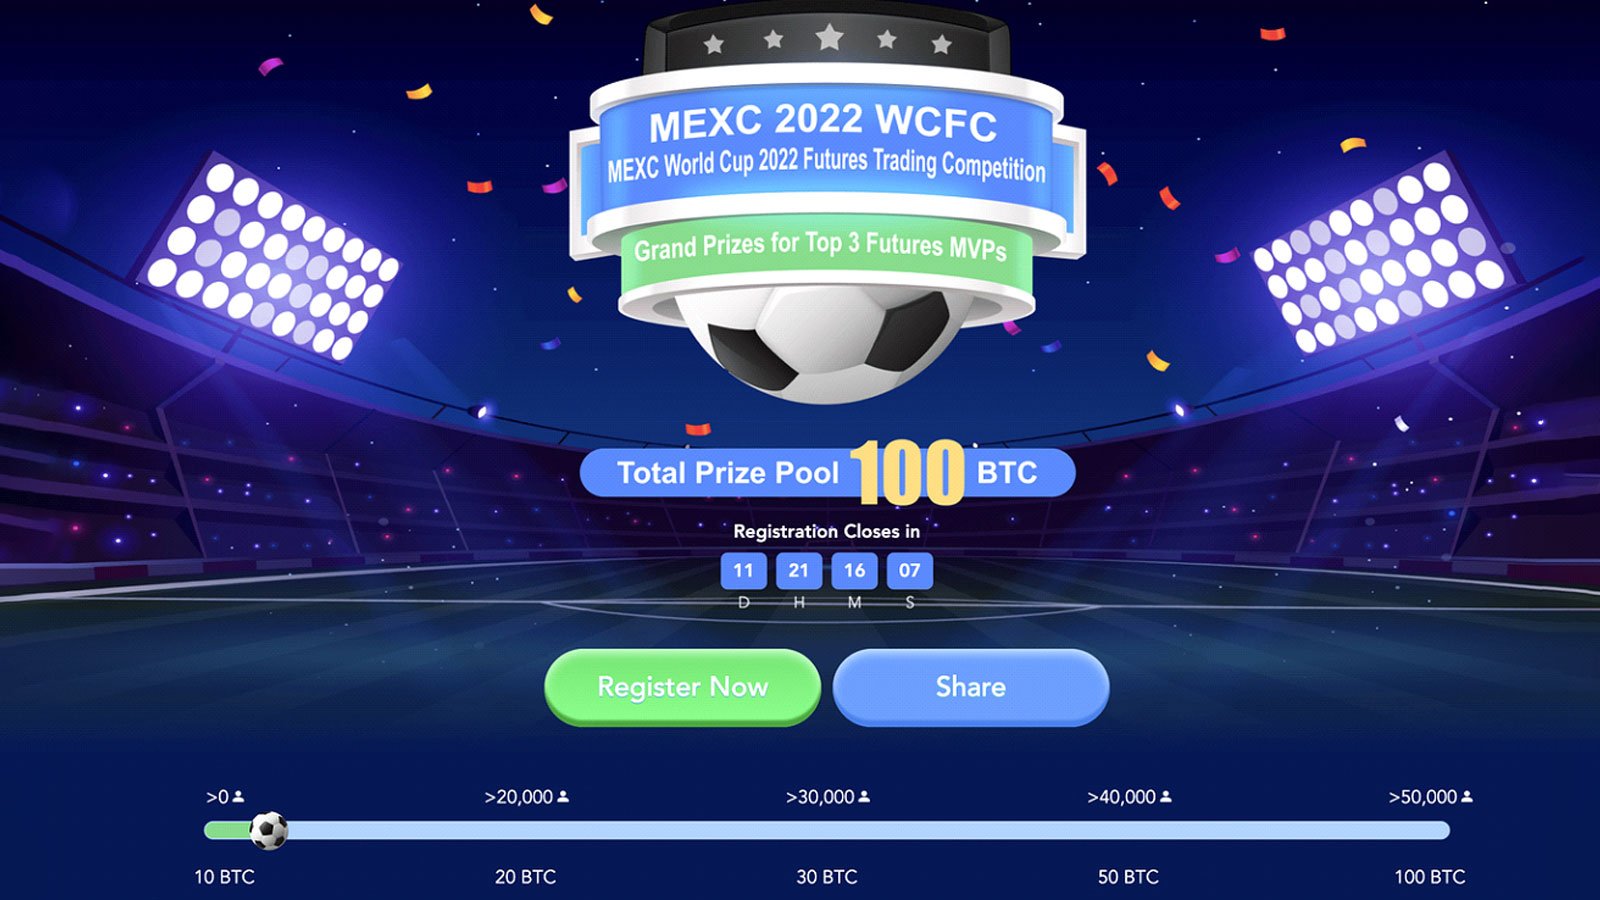 100 BTC To Be Won in MEXC's World Cup Futures Individual Trading Competition - December 2022